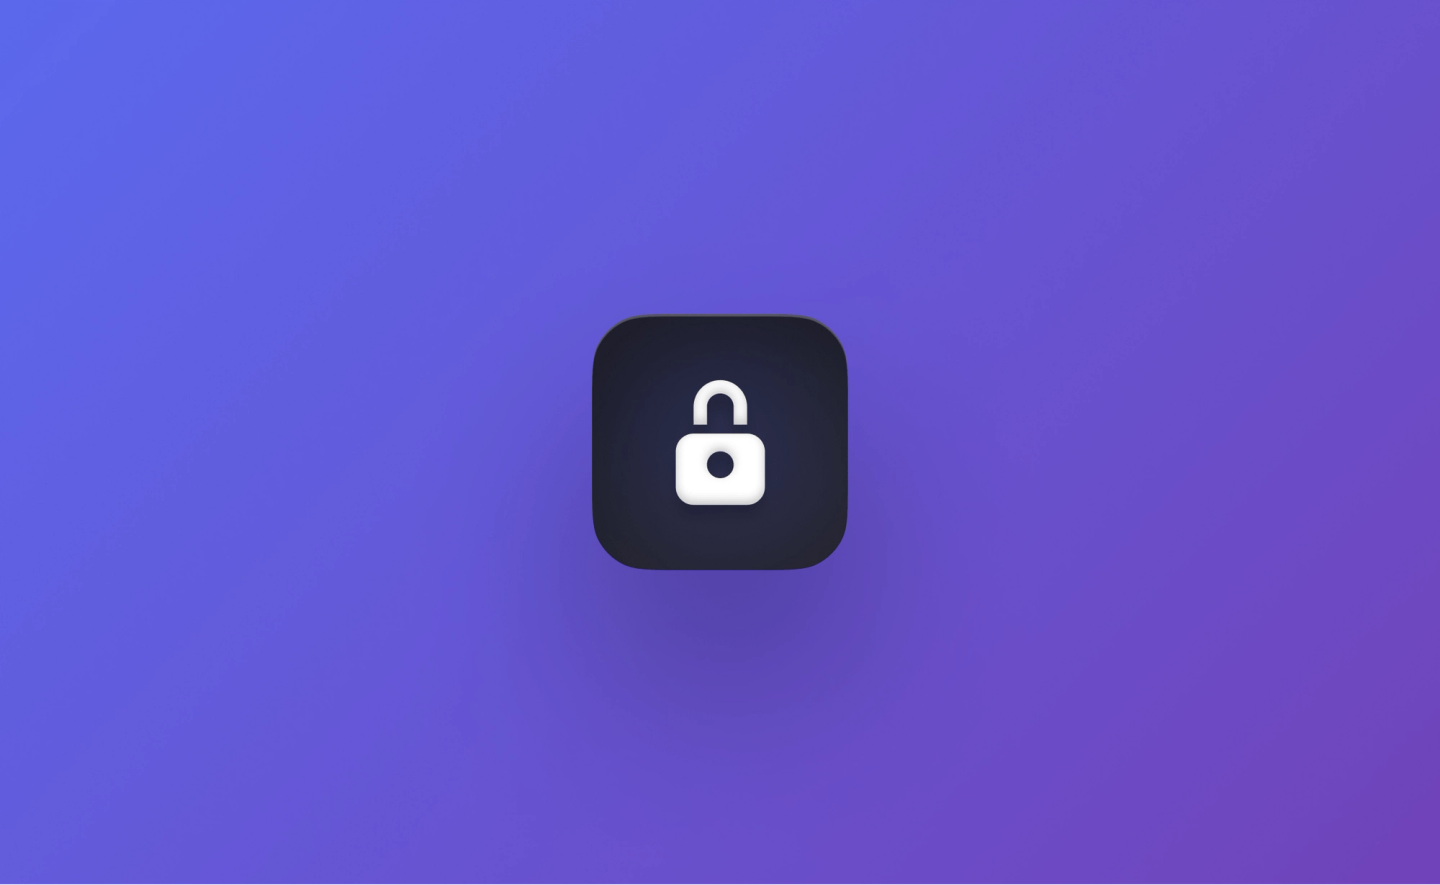 Lock icon for the security page